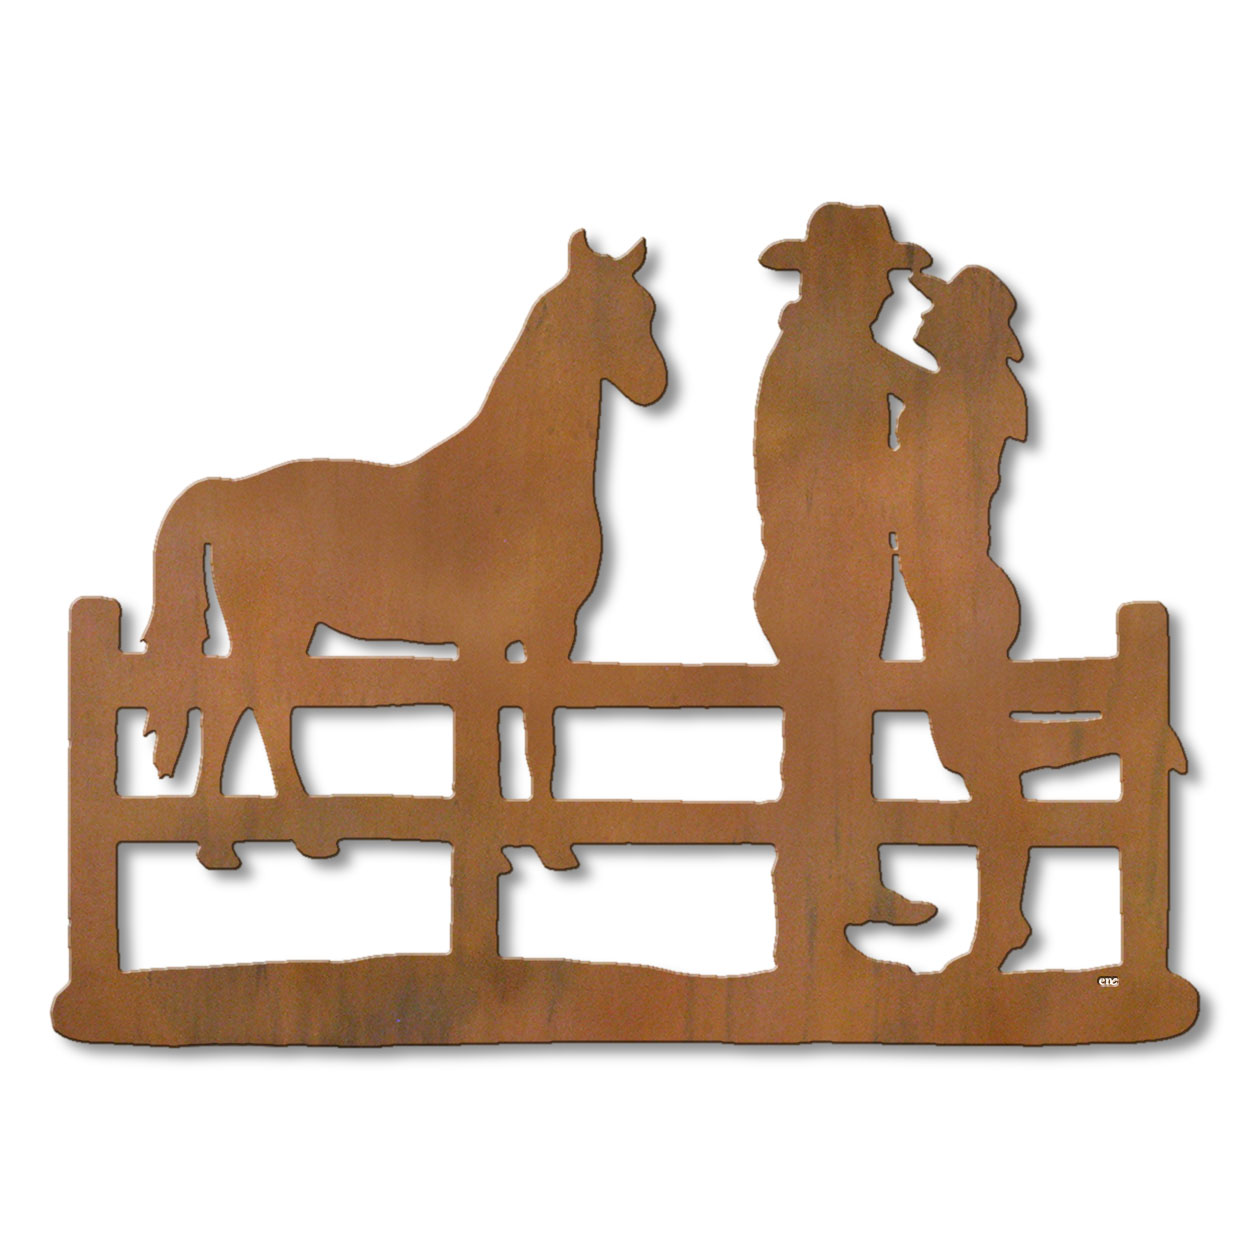 625010r - 18 or 24in Metal Wall Art - Cowboy Corral - Rust Patina